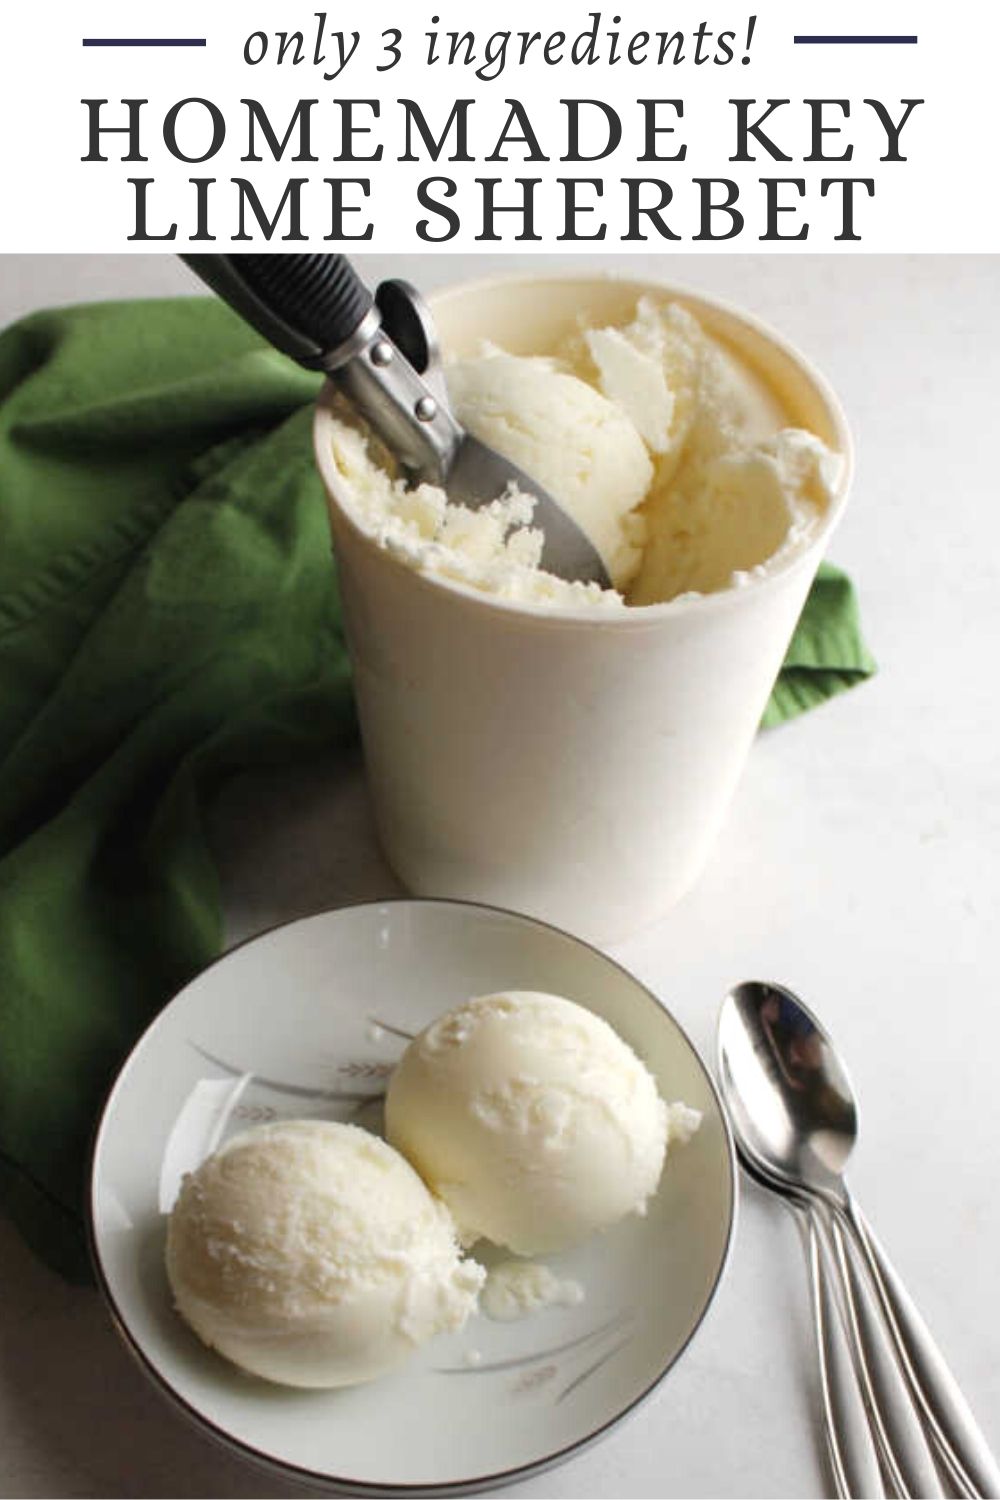 You can have this tasty key lime sherbet churning in no time.  There is almost no effort involved at all. Plus the key lime flavor really shines through. It tastes so fresh and cold, perfect for a hot summer evening!